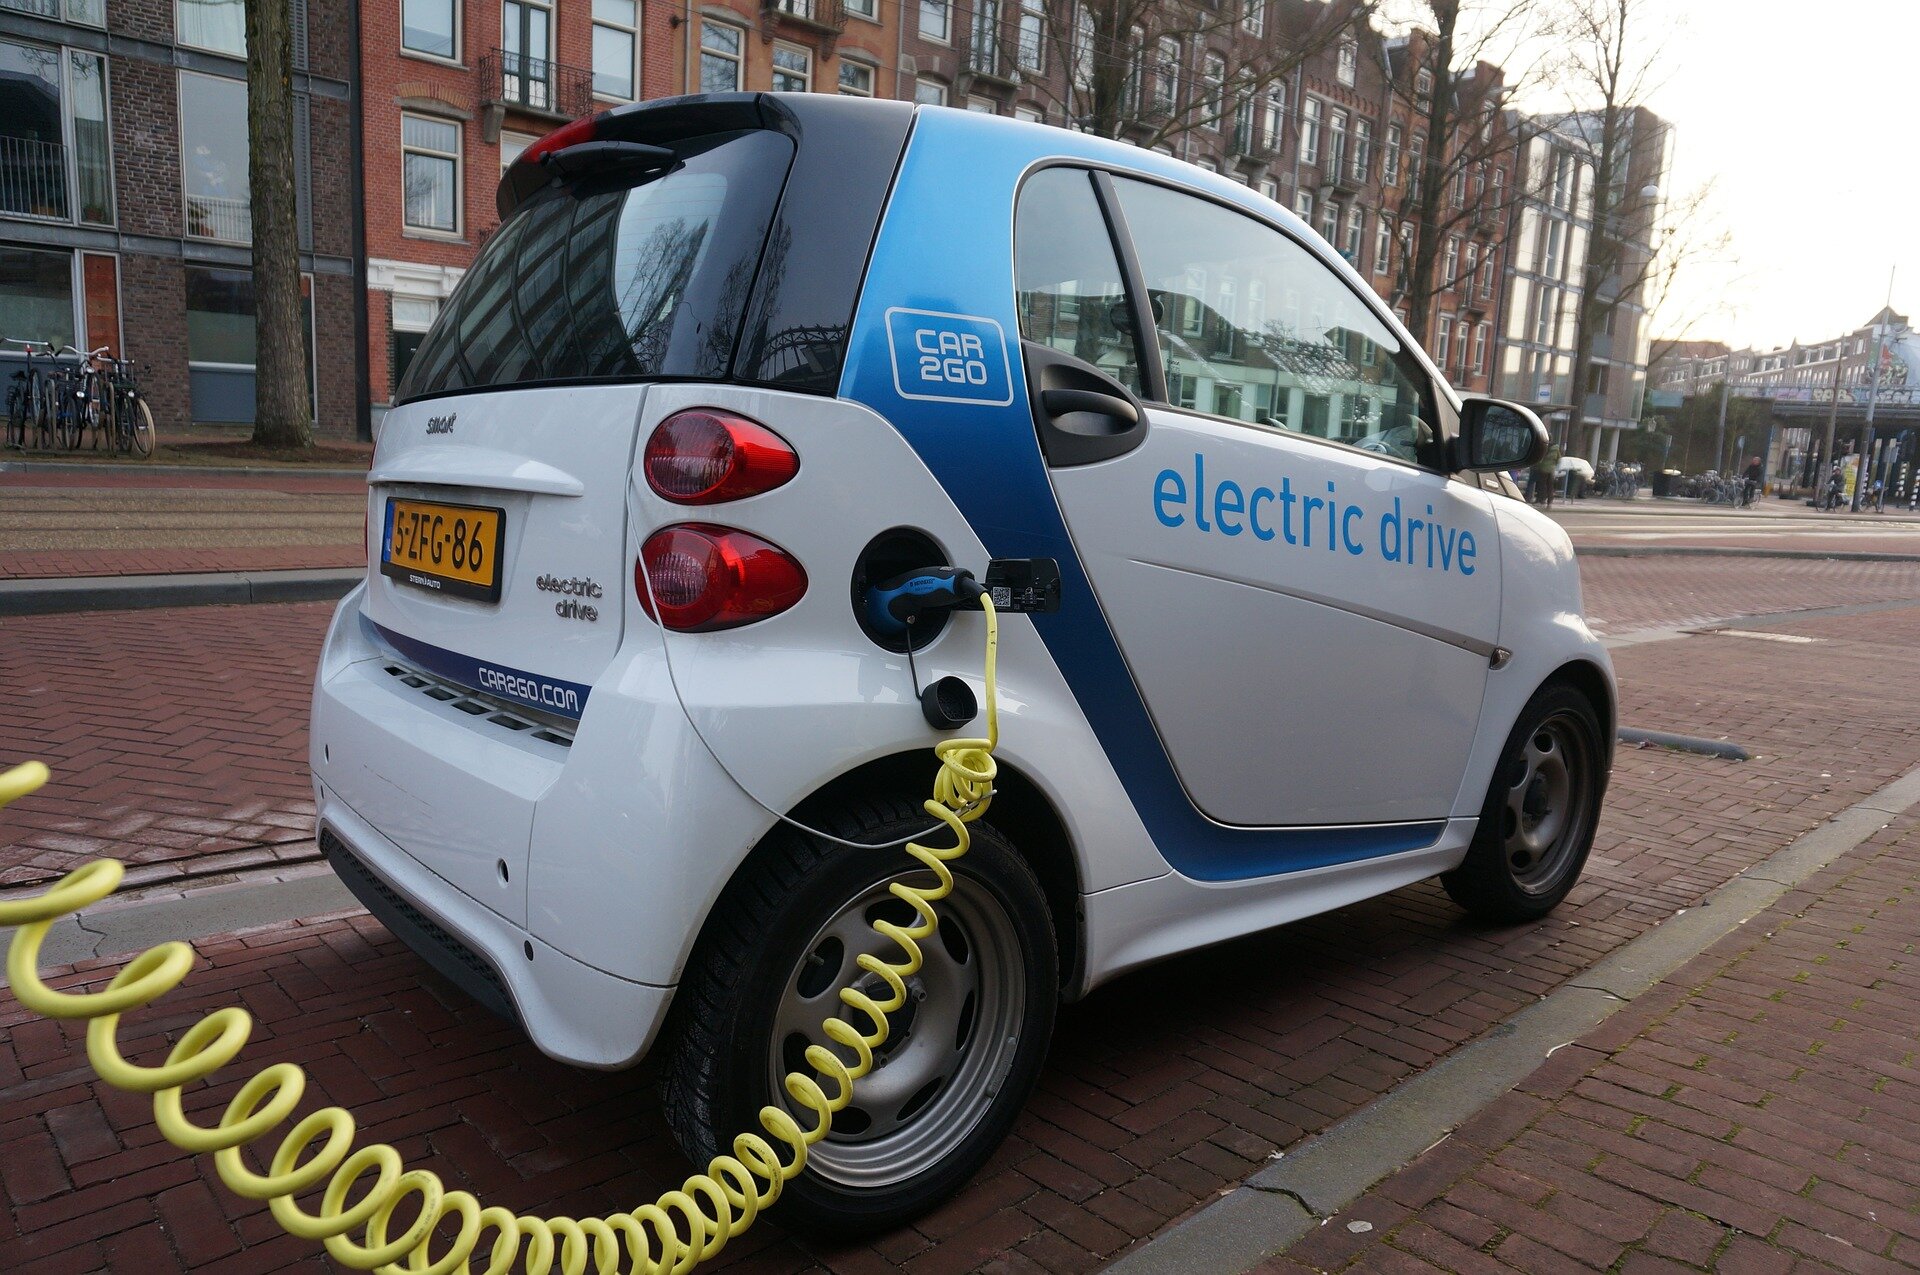 #Pedestrians may be twice as likely to be hit by electric/hybrid cars as petrol/diesel ones